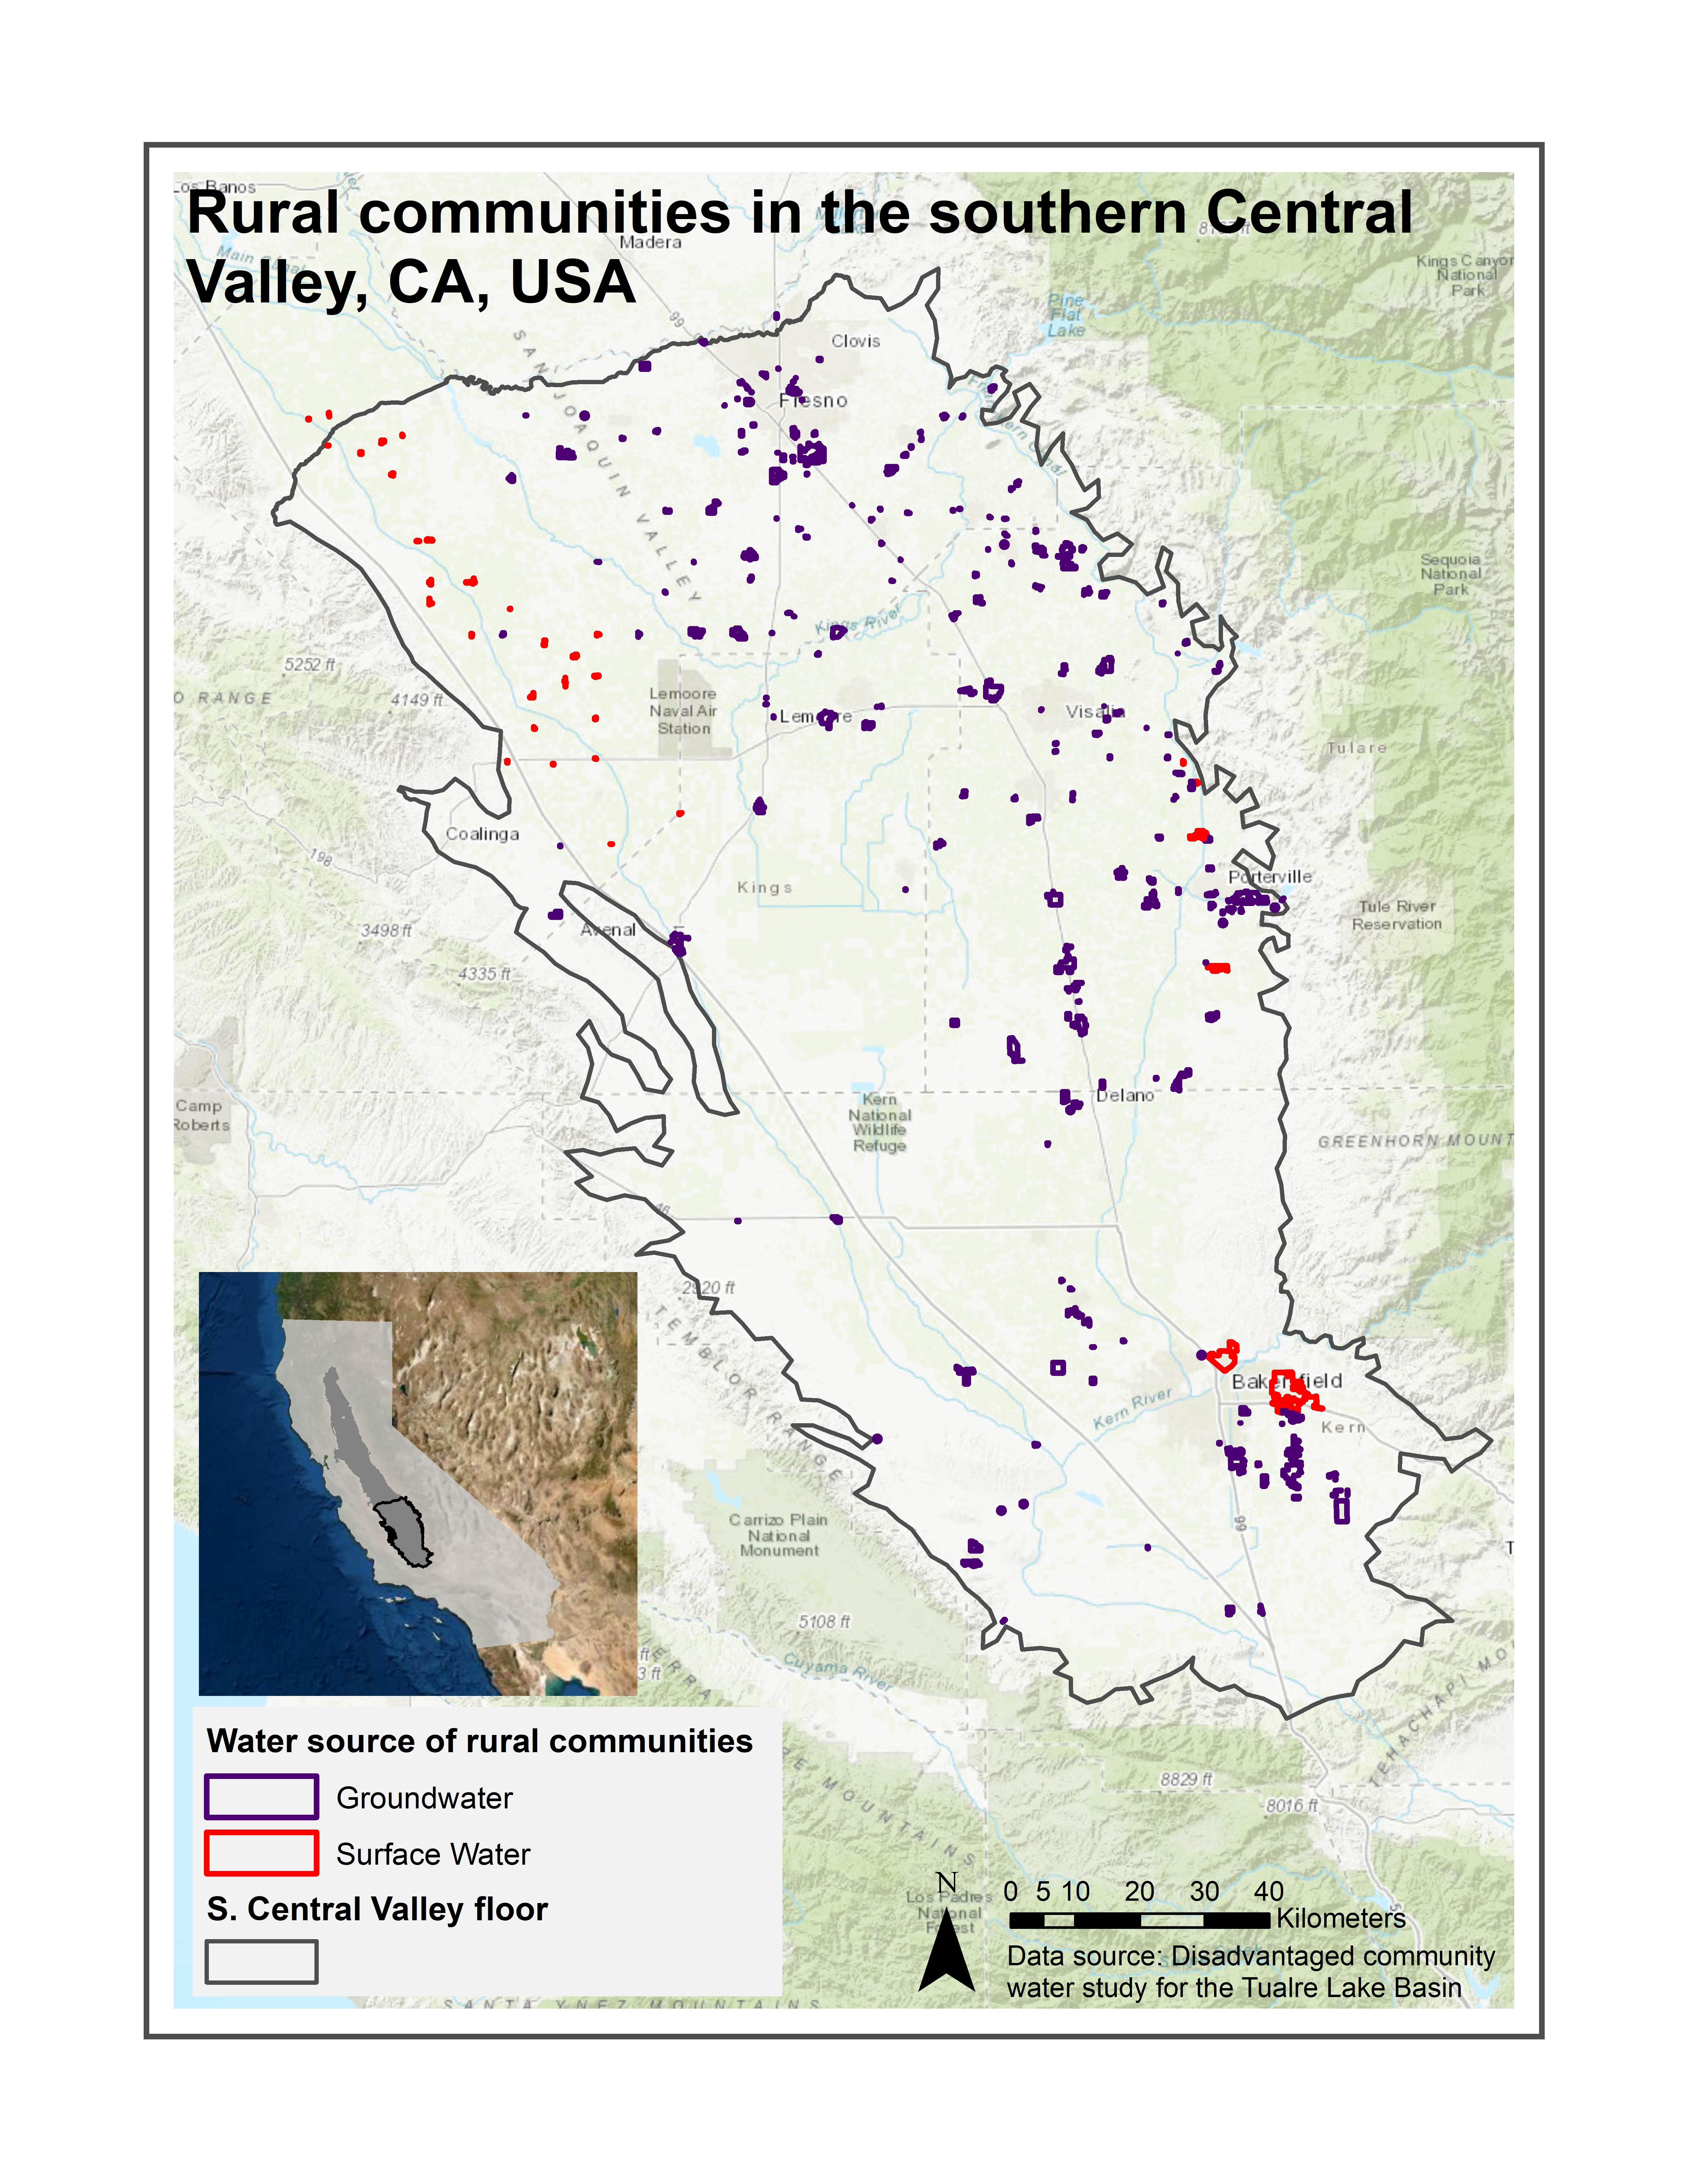 A map of the southern Central Valley disadvantaged community water study Marwaha conducted.